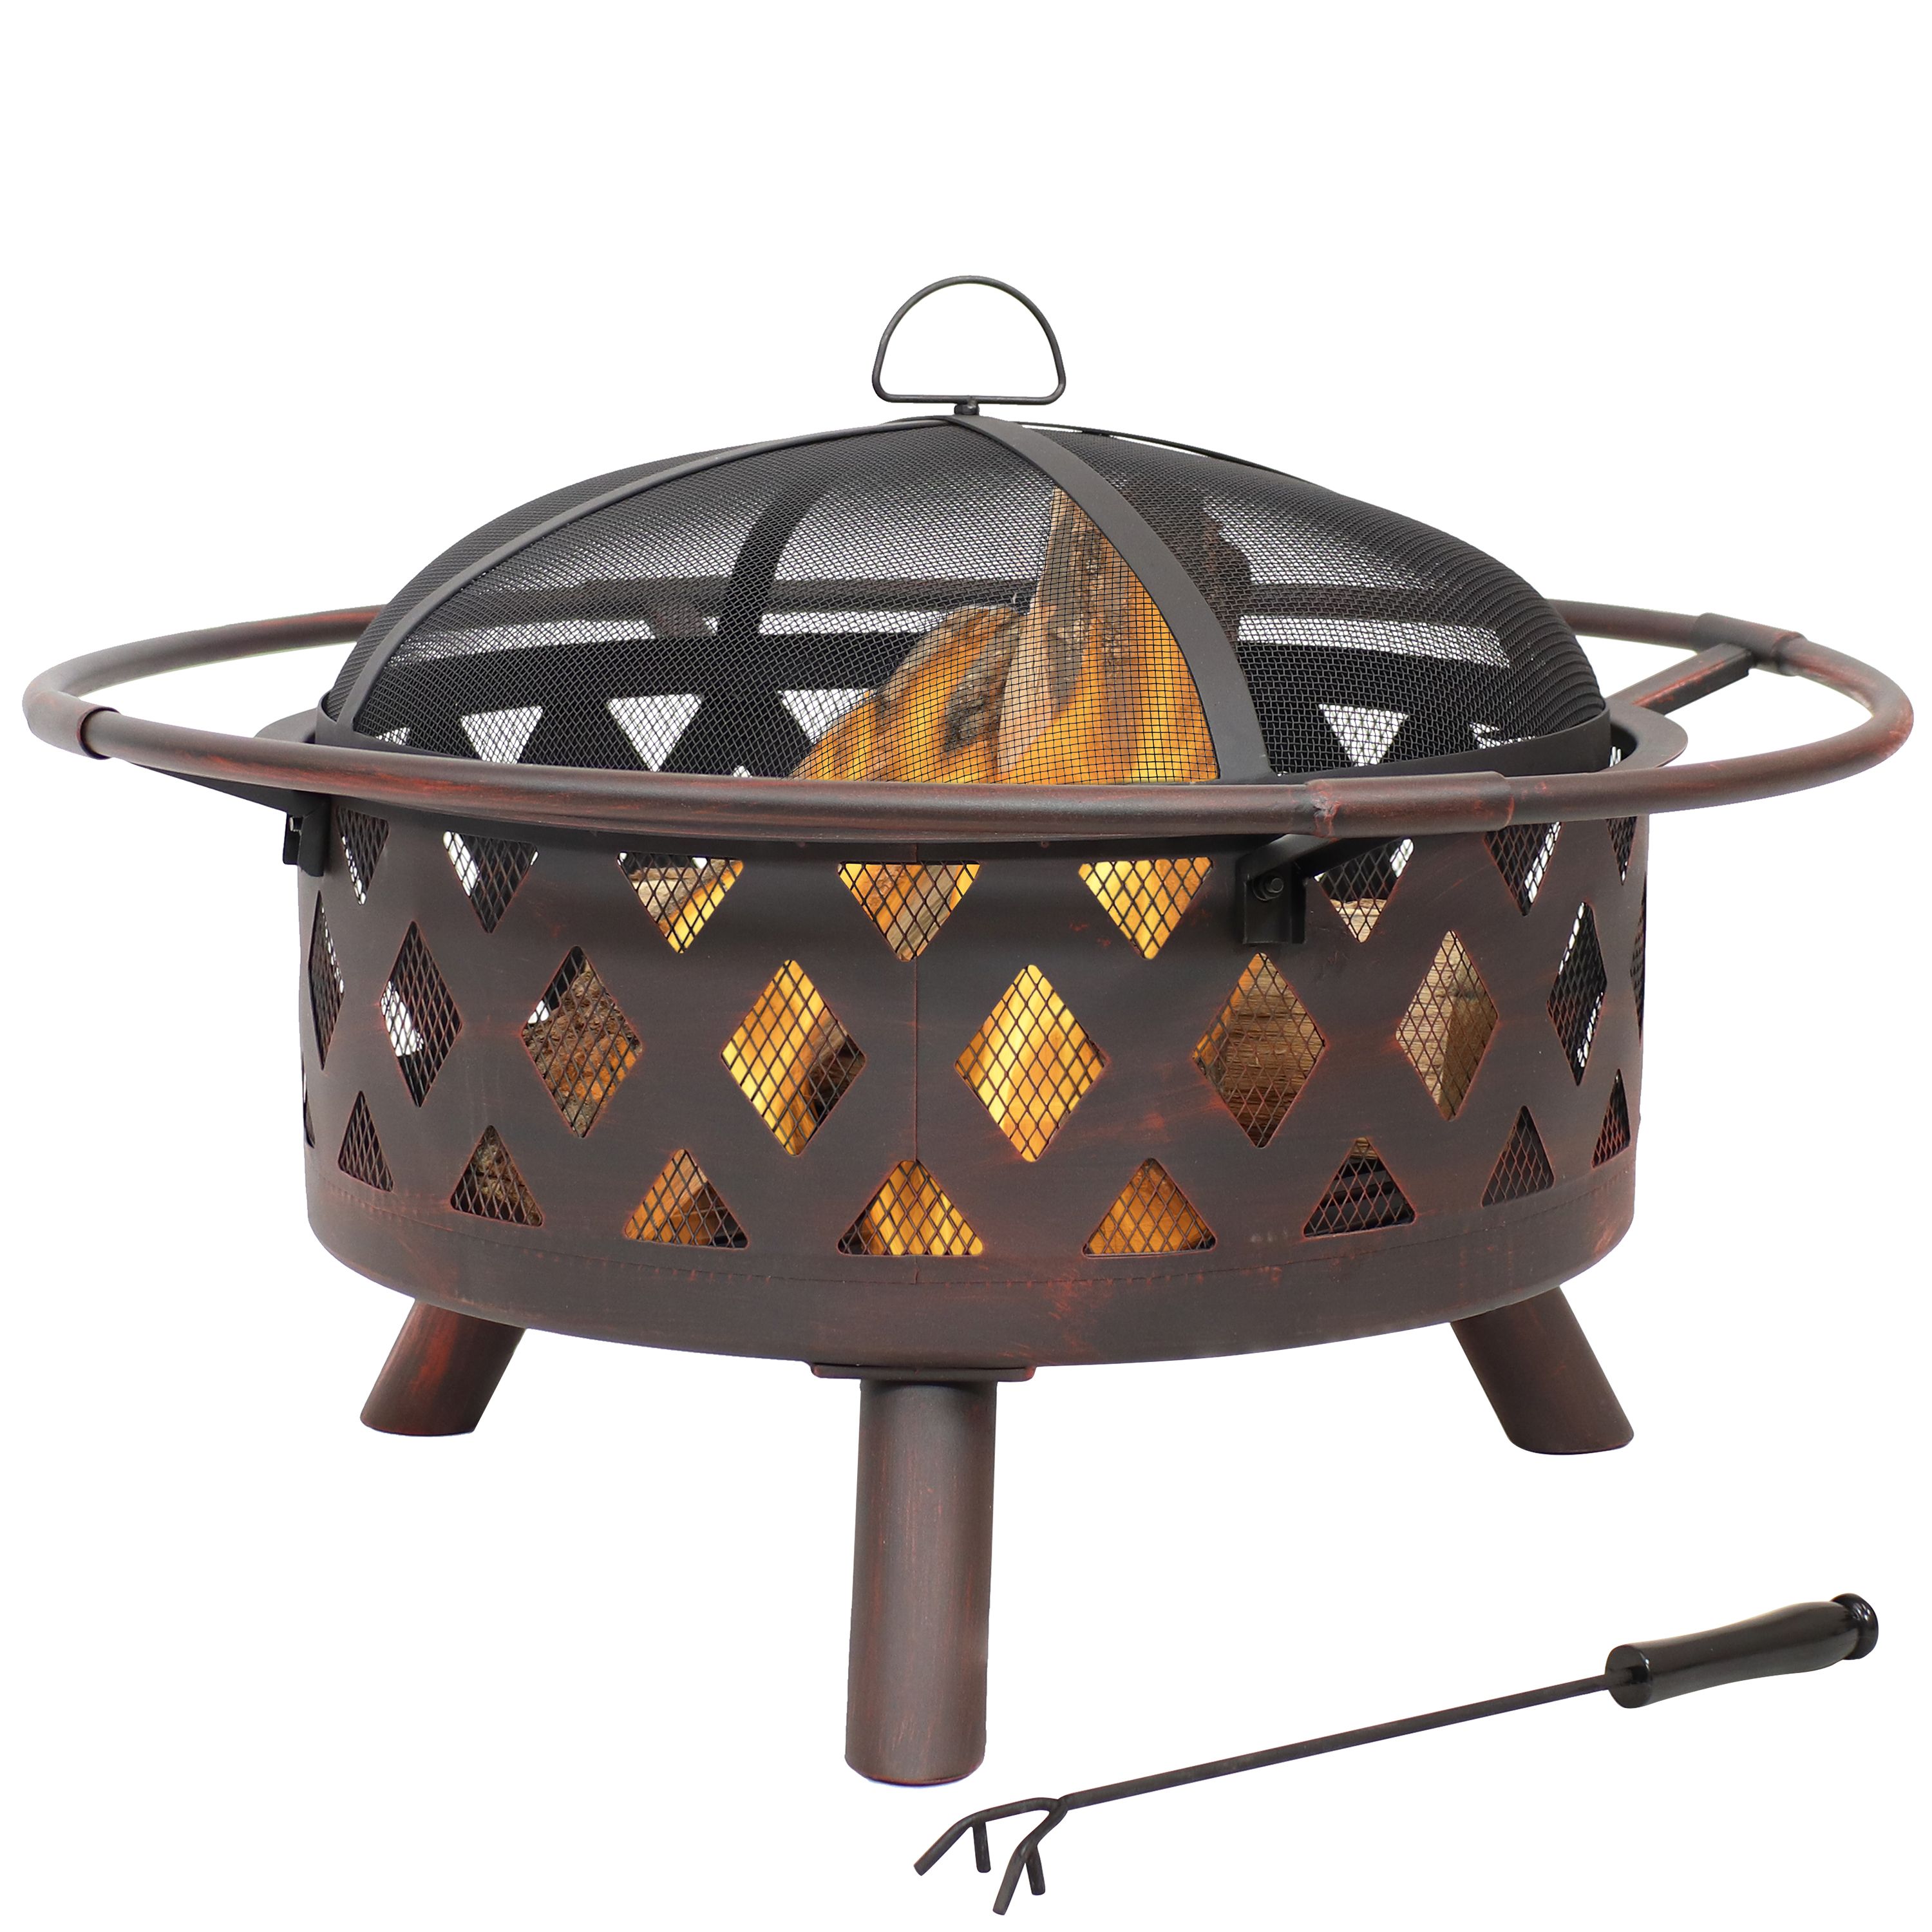 Sunnydaze Bronze Crossweave Wood Burning Fire Pit with Spark Screen - 30-Inch